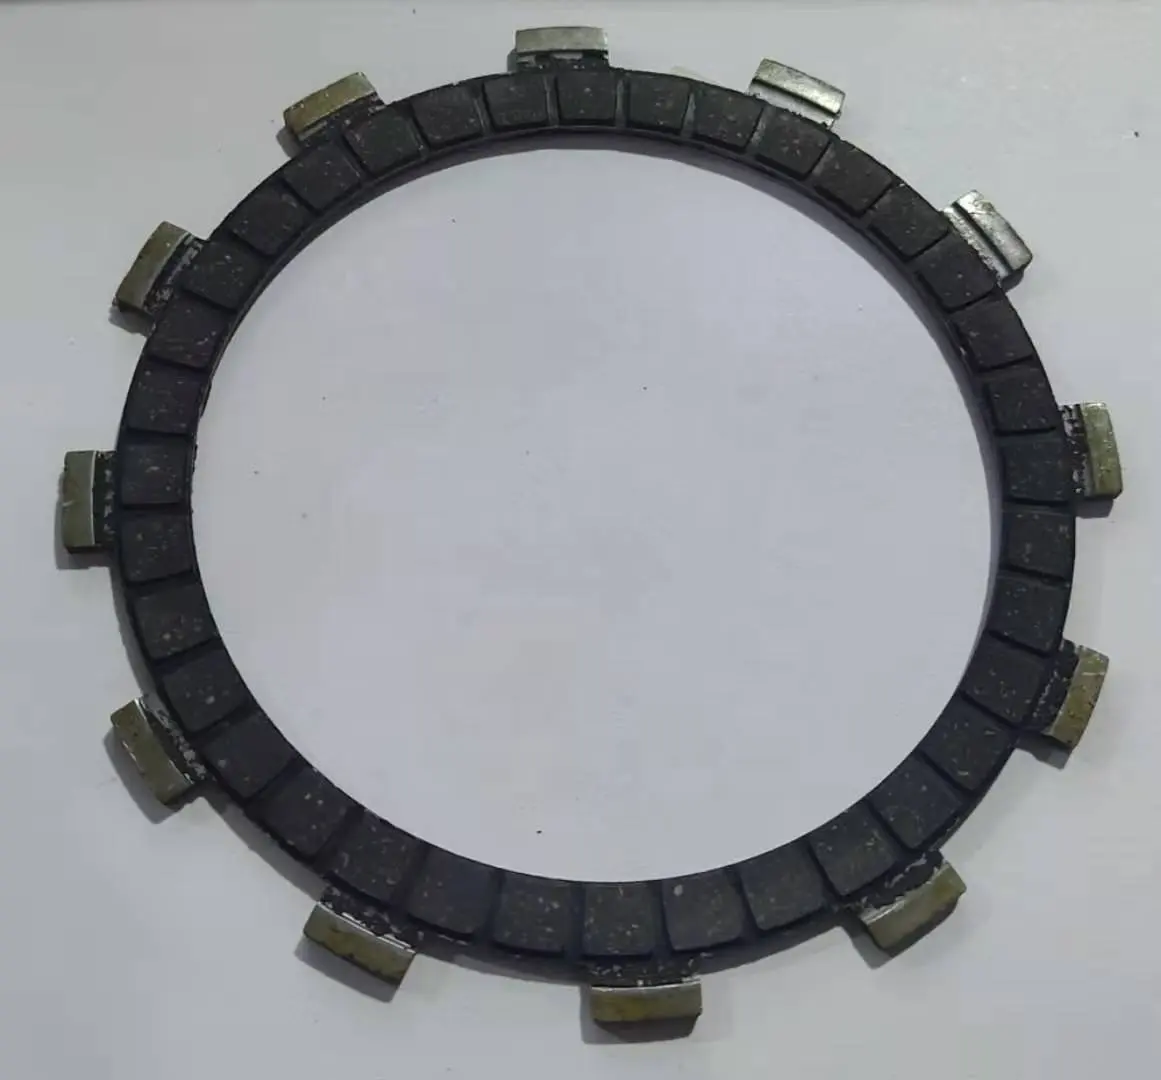 Made in China model B125 motorcycle friction disc clutch disc